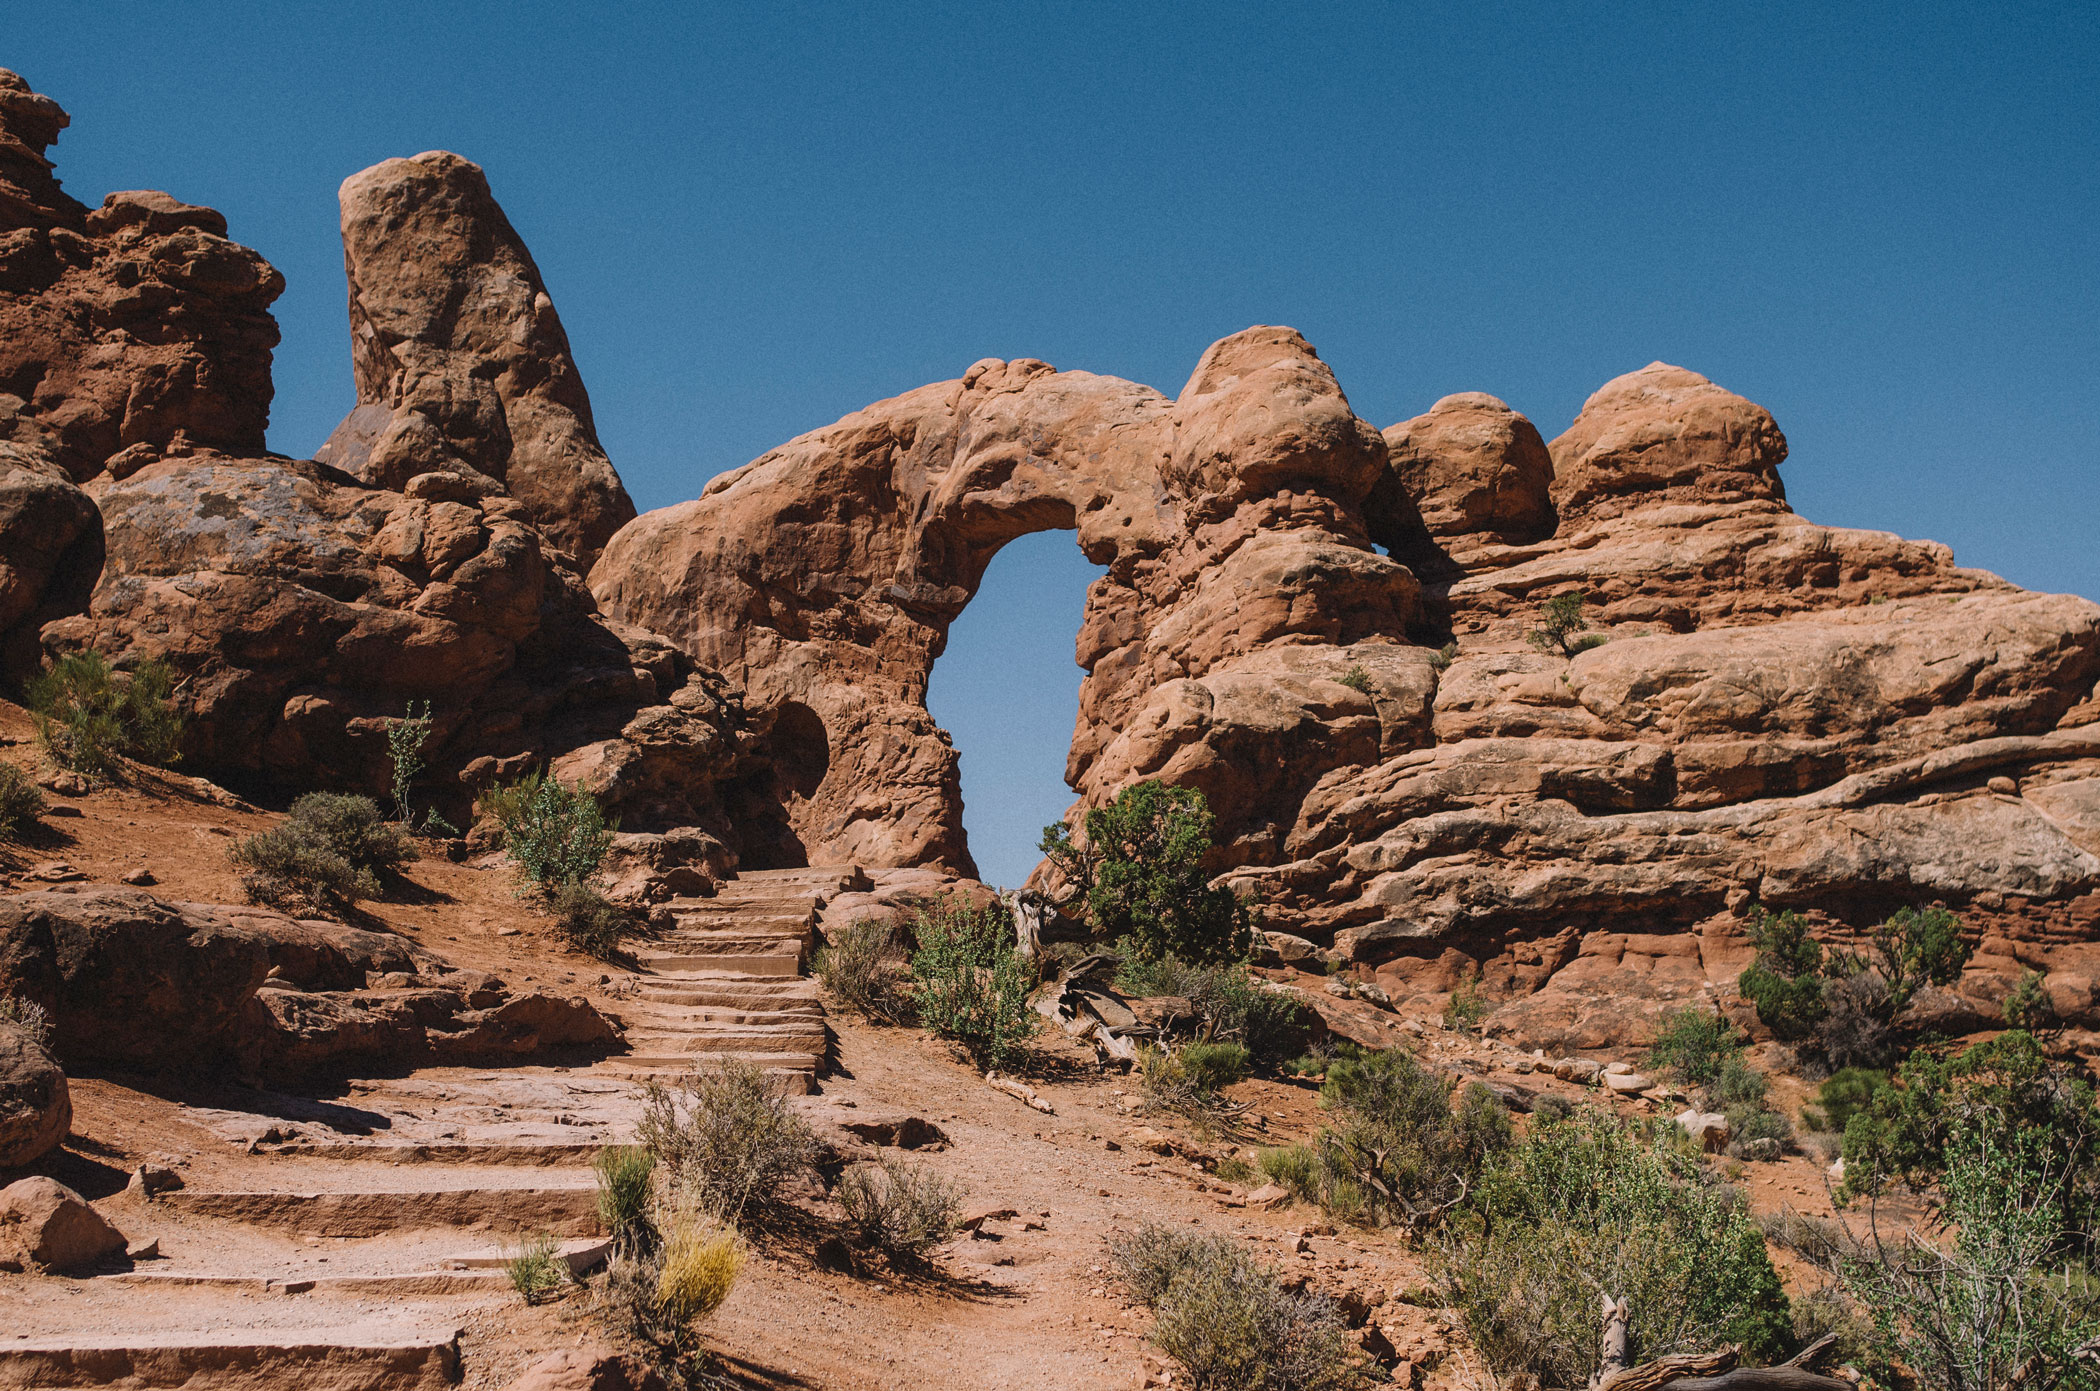 Arches National Park with blue sky behind the rocky landscape.